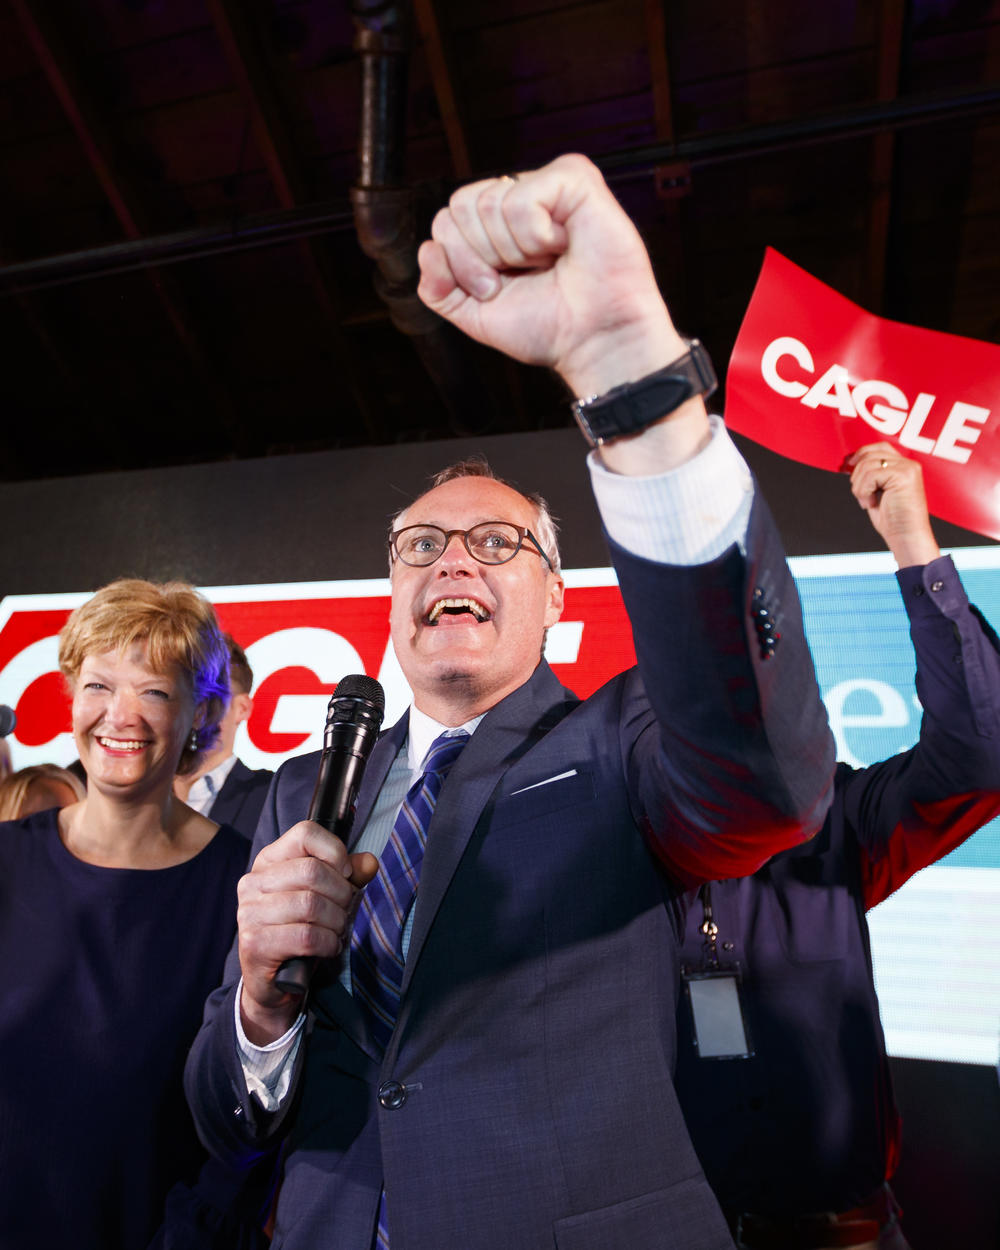 Republican candidate for Georgia Gov. Casey Cagle speaks to his supporters as he enters a runoff with Brian Kemp during an election-night watch party in Gainesville, Ga., Tuesday, May 22, 2018.